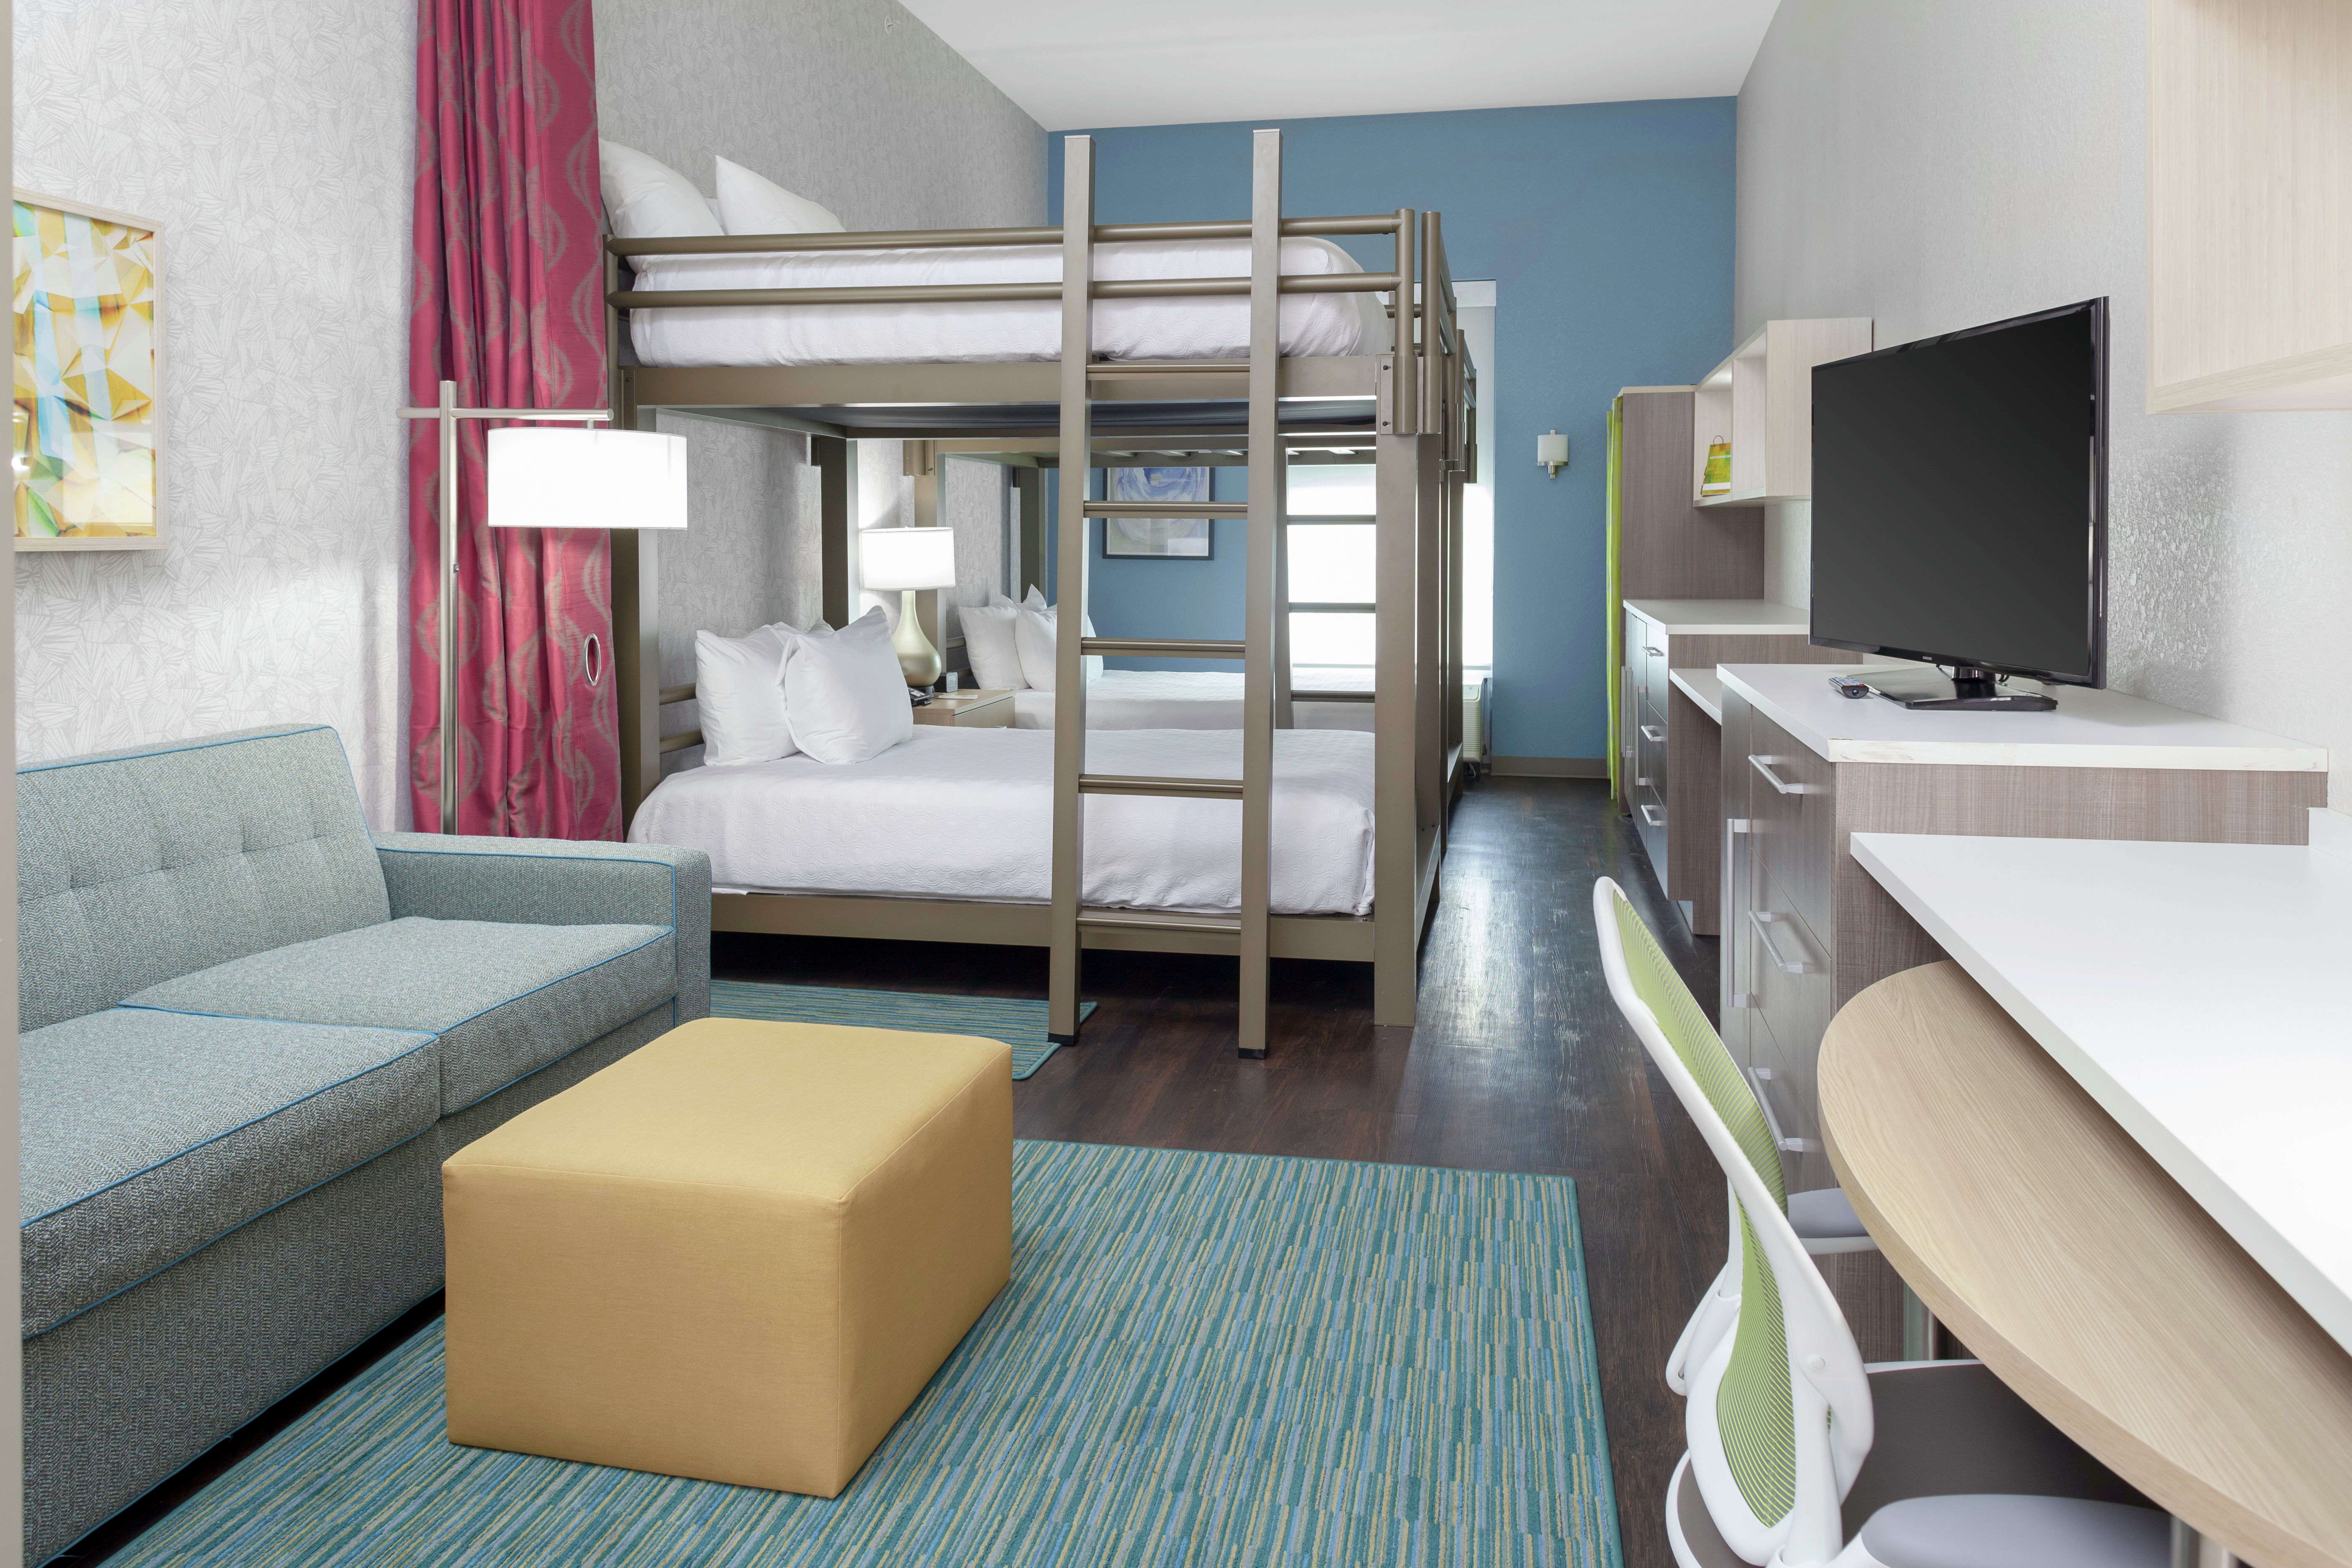 Guest Suite with Bunk and Queen Beds, Lounge Area, TV, and Work Desk